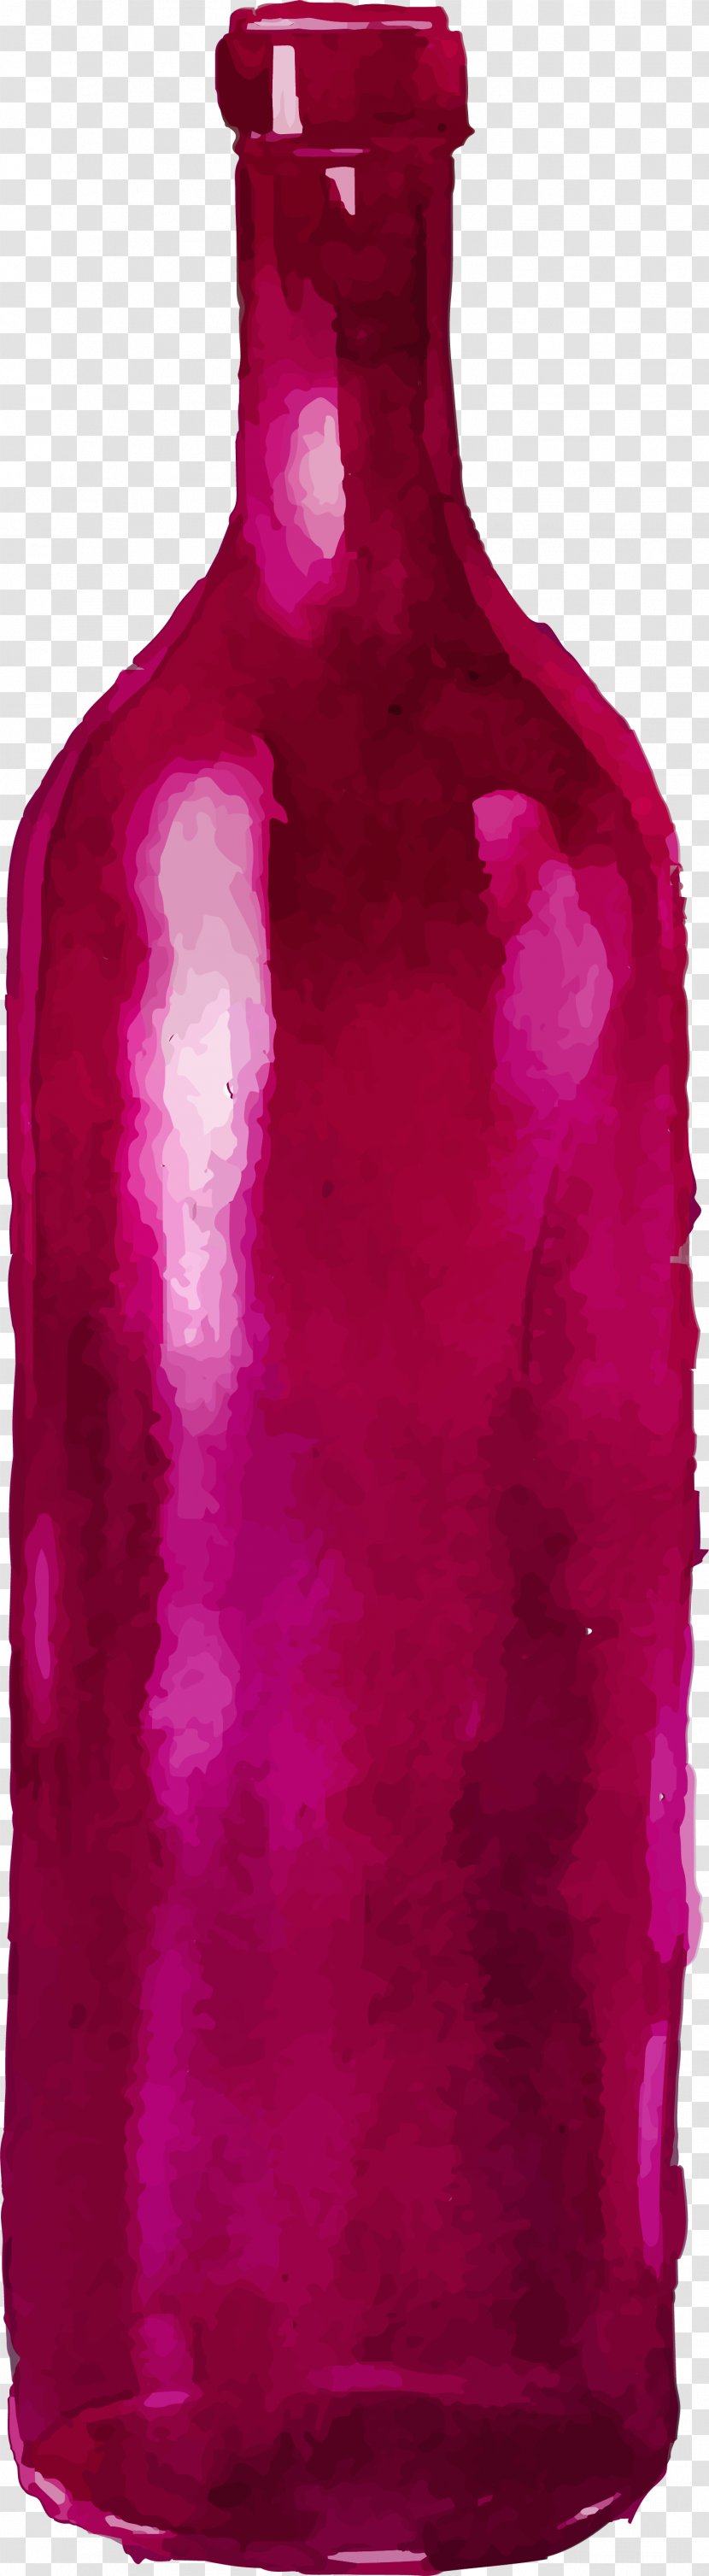 Red Wine Bottle Watercolor Painting - Drinkware - Hand Painted Transparent PNG